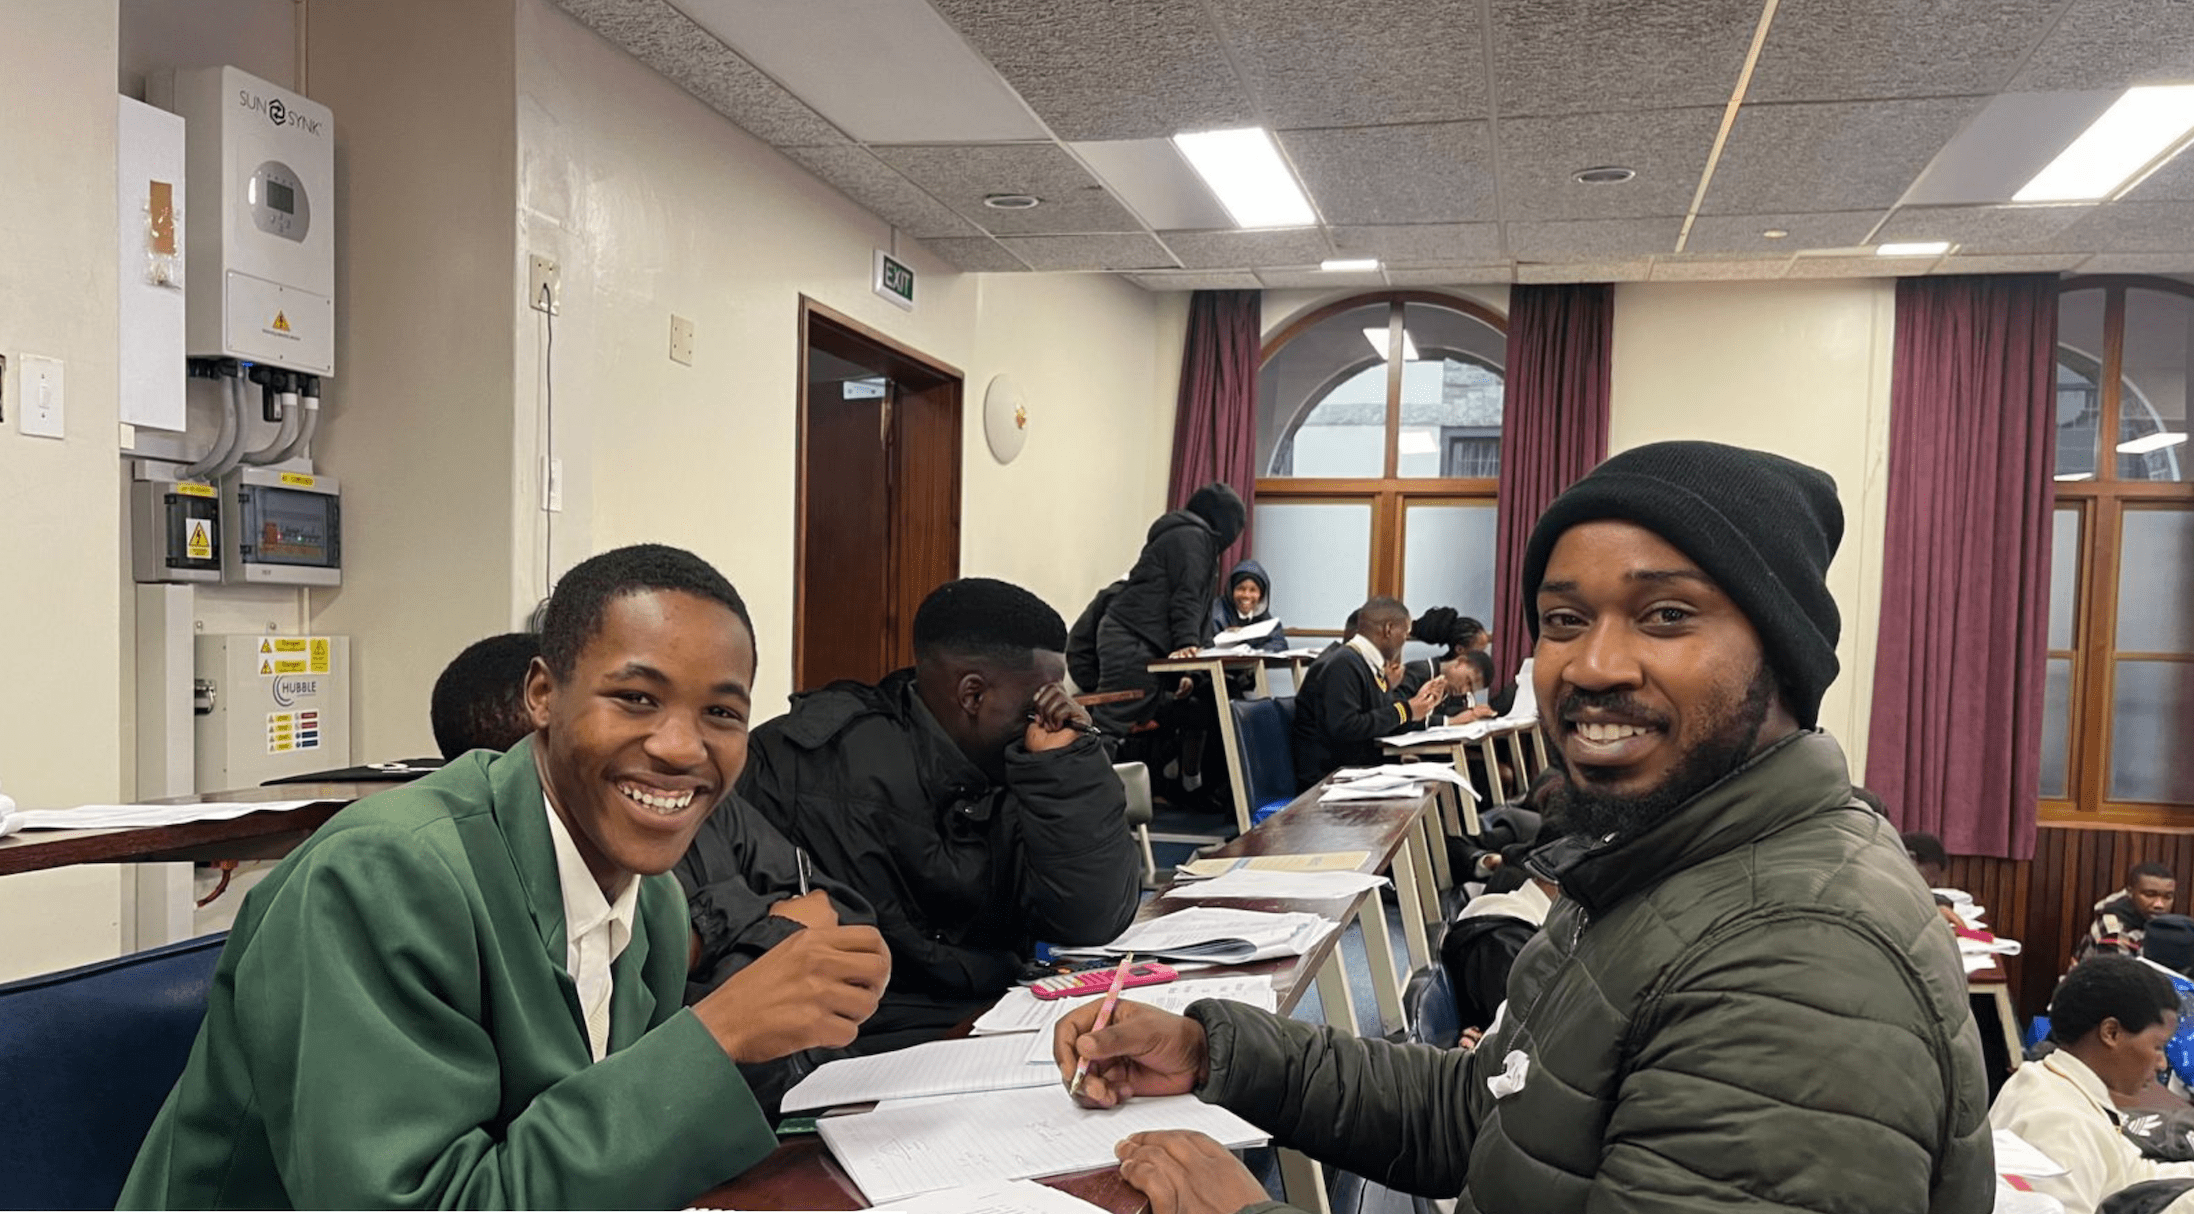 Students and learners at the Maths Winter School